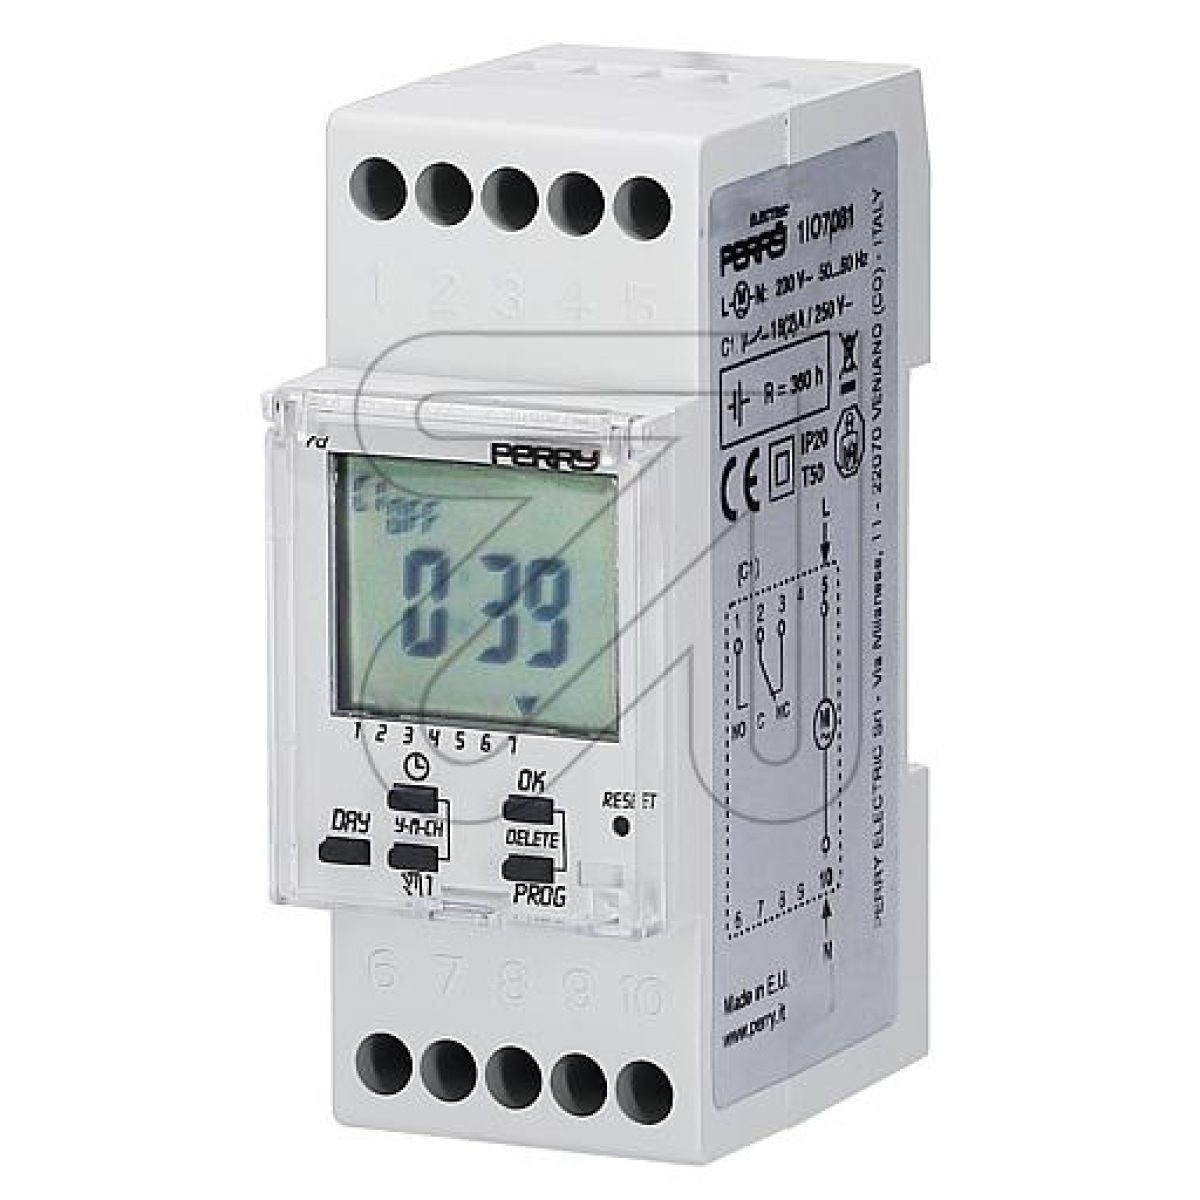 PERRY ELECTRICDigital time switch CPU35wu-LCD/1IO 7081 (7081)Article-No: 113355